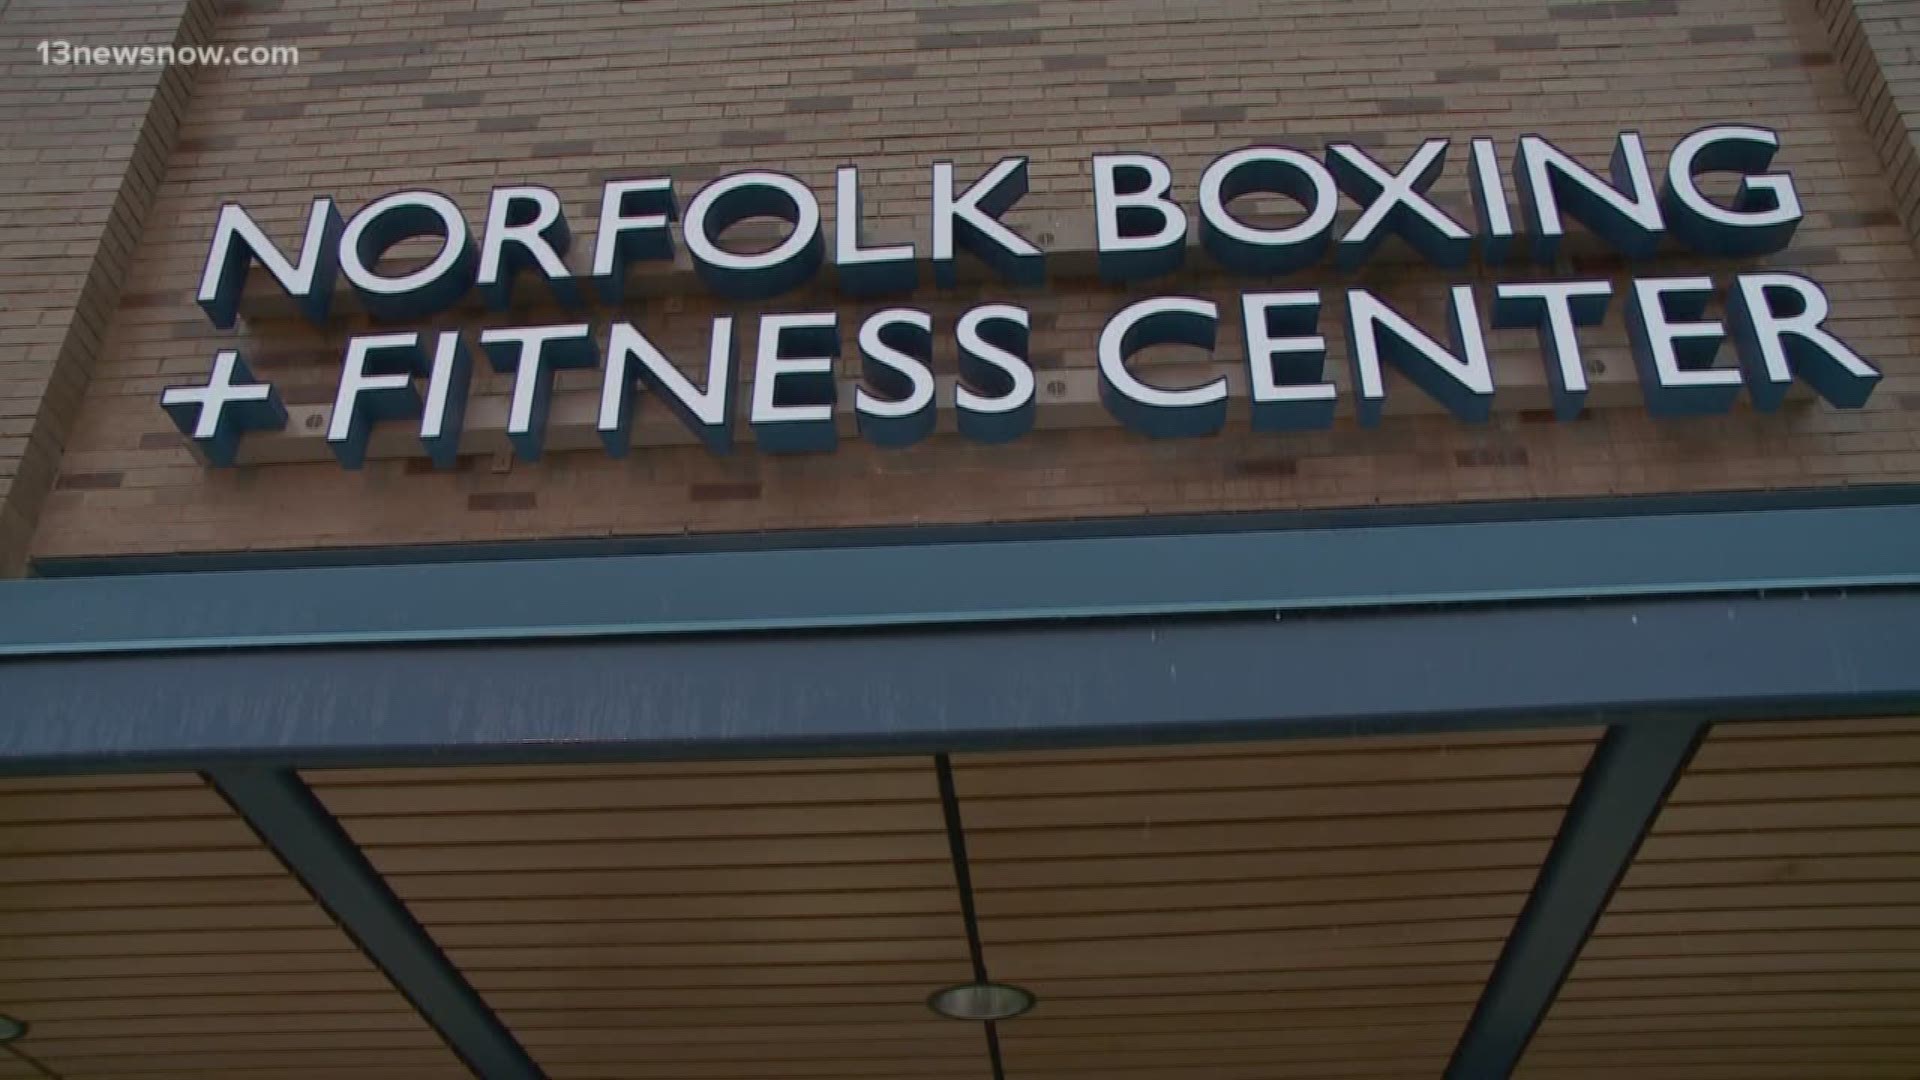 The Norfolk Boxing and Fitness Center at Harbor Park will be named after Pernell "Sweet Pea" Whitaker. City council believes he put Norfolk on the map and can continue to inspire young people.